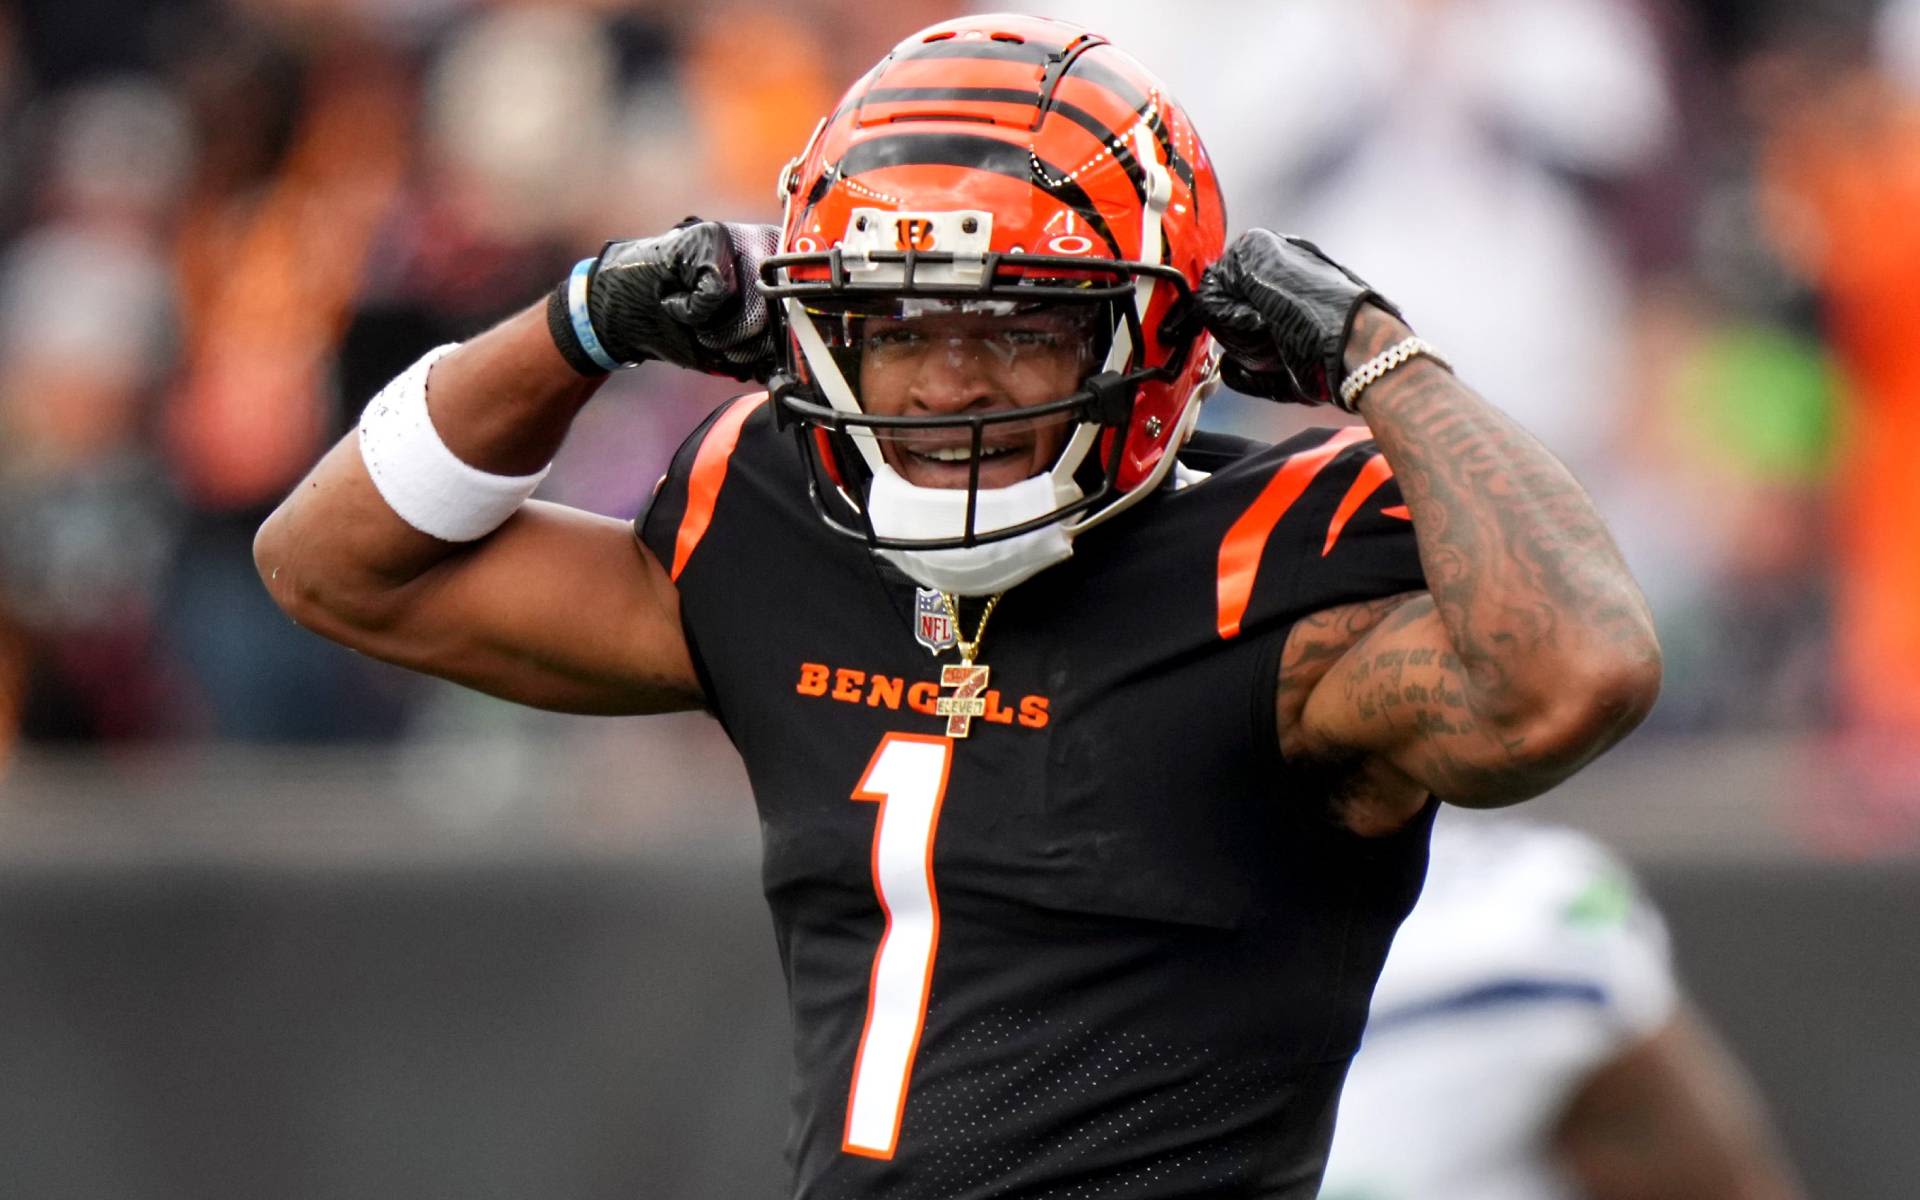 Bengals WR Ja’Marr Chase charts highly in top 50 overall players list